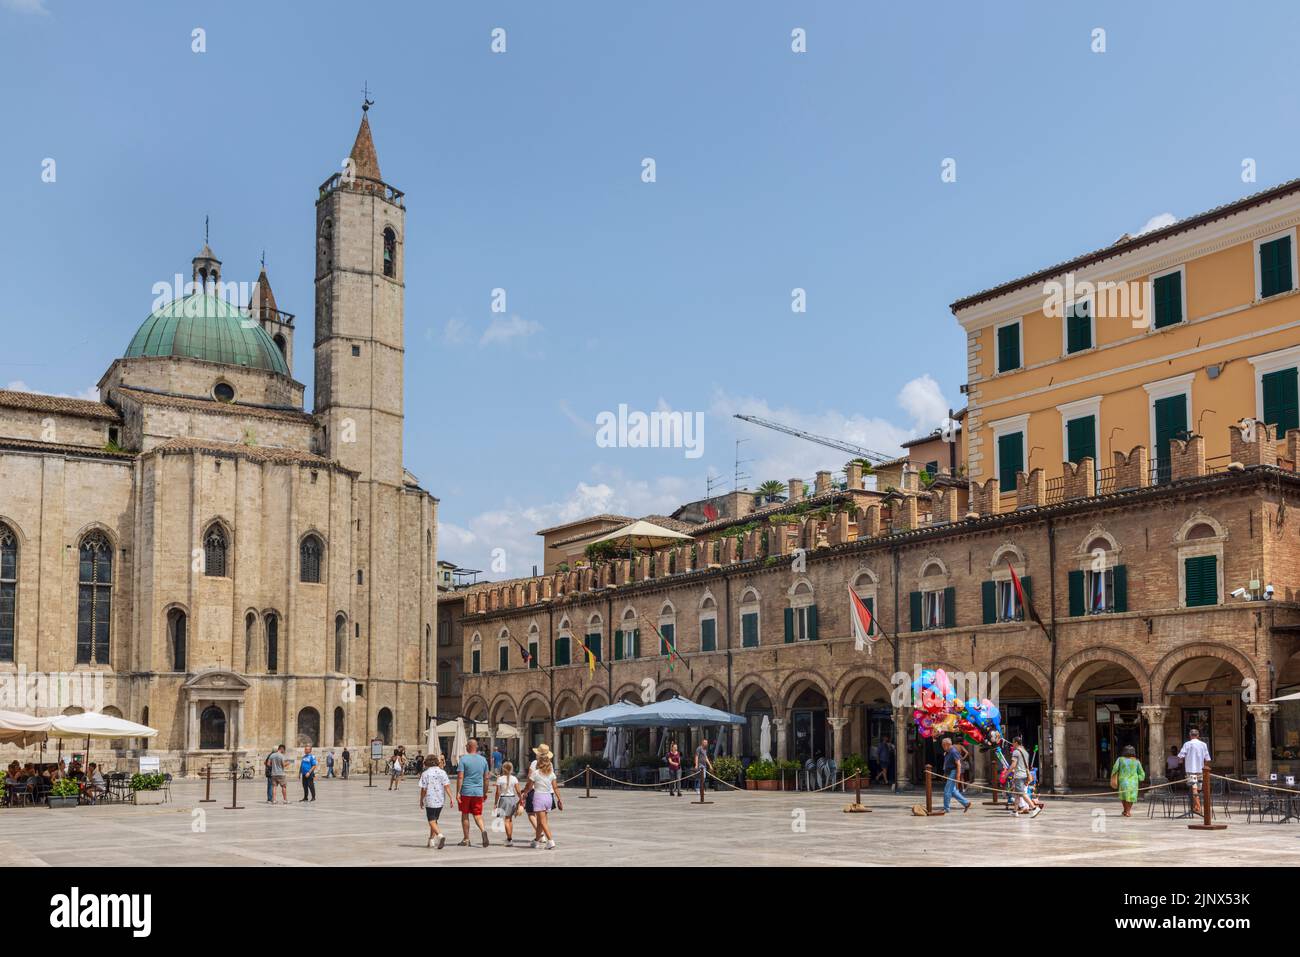 Ascoli Piceno, Marches, Italie Banque D'Images